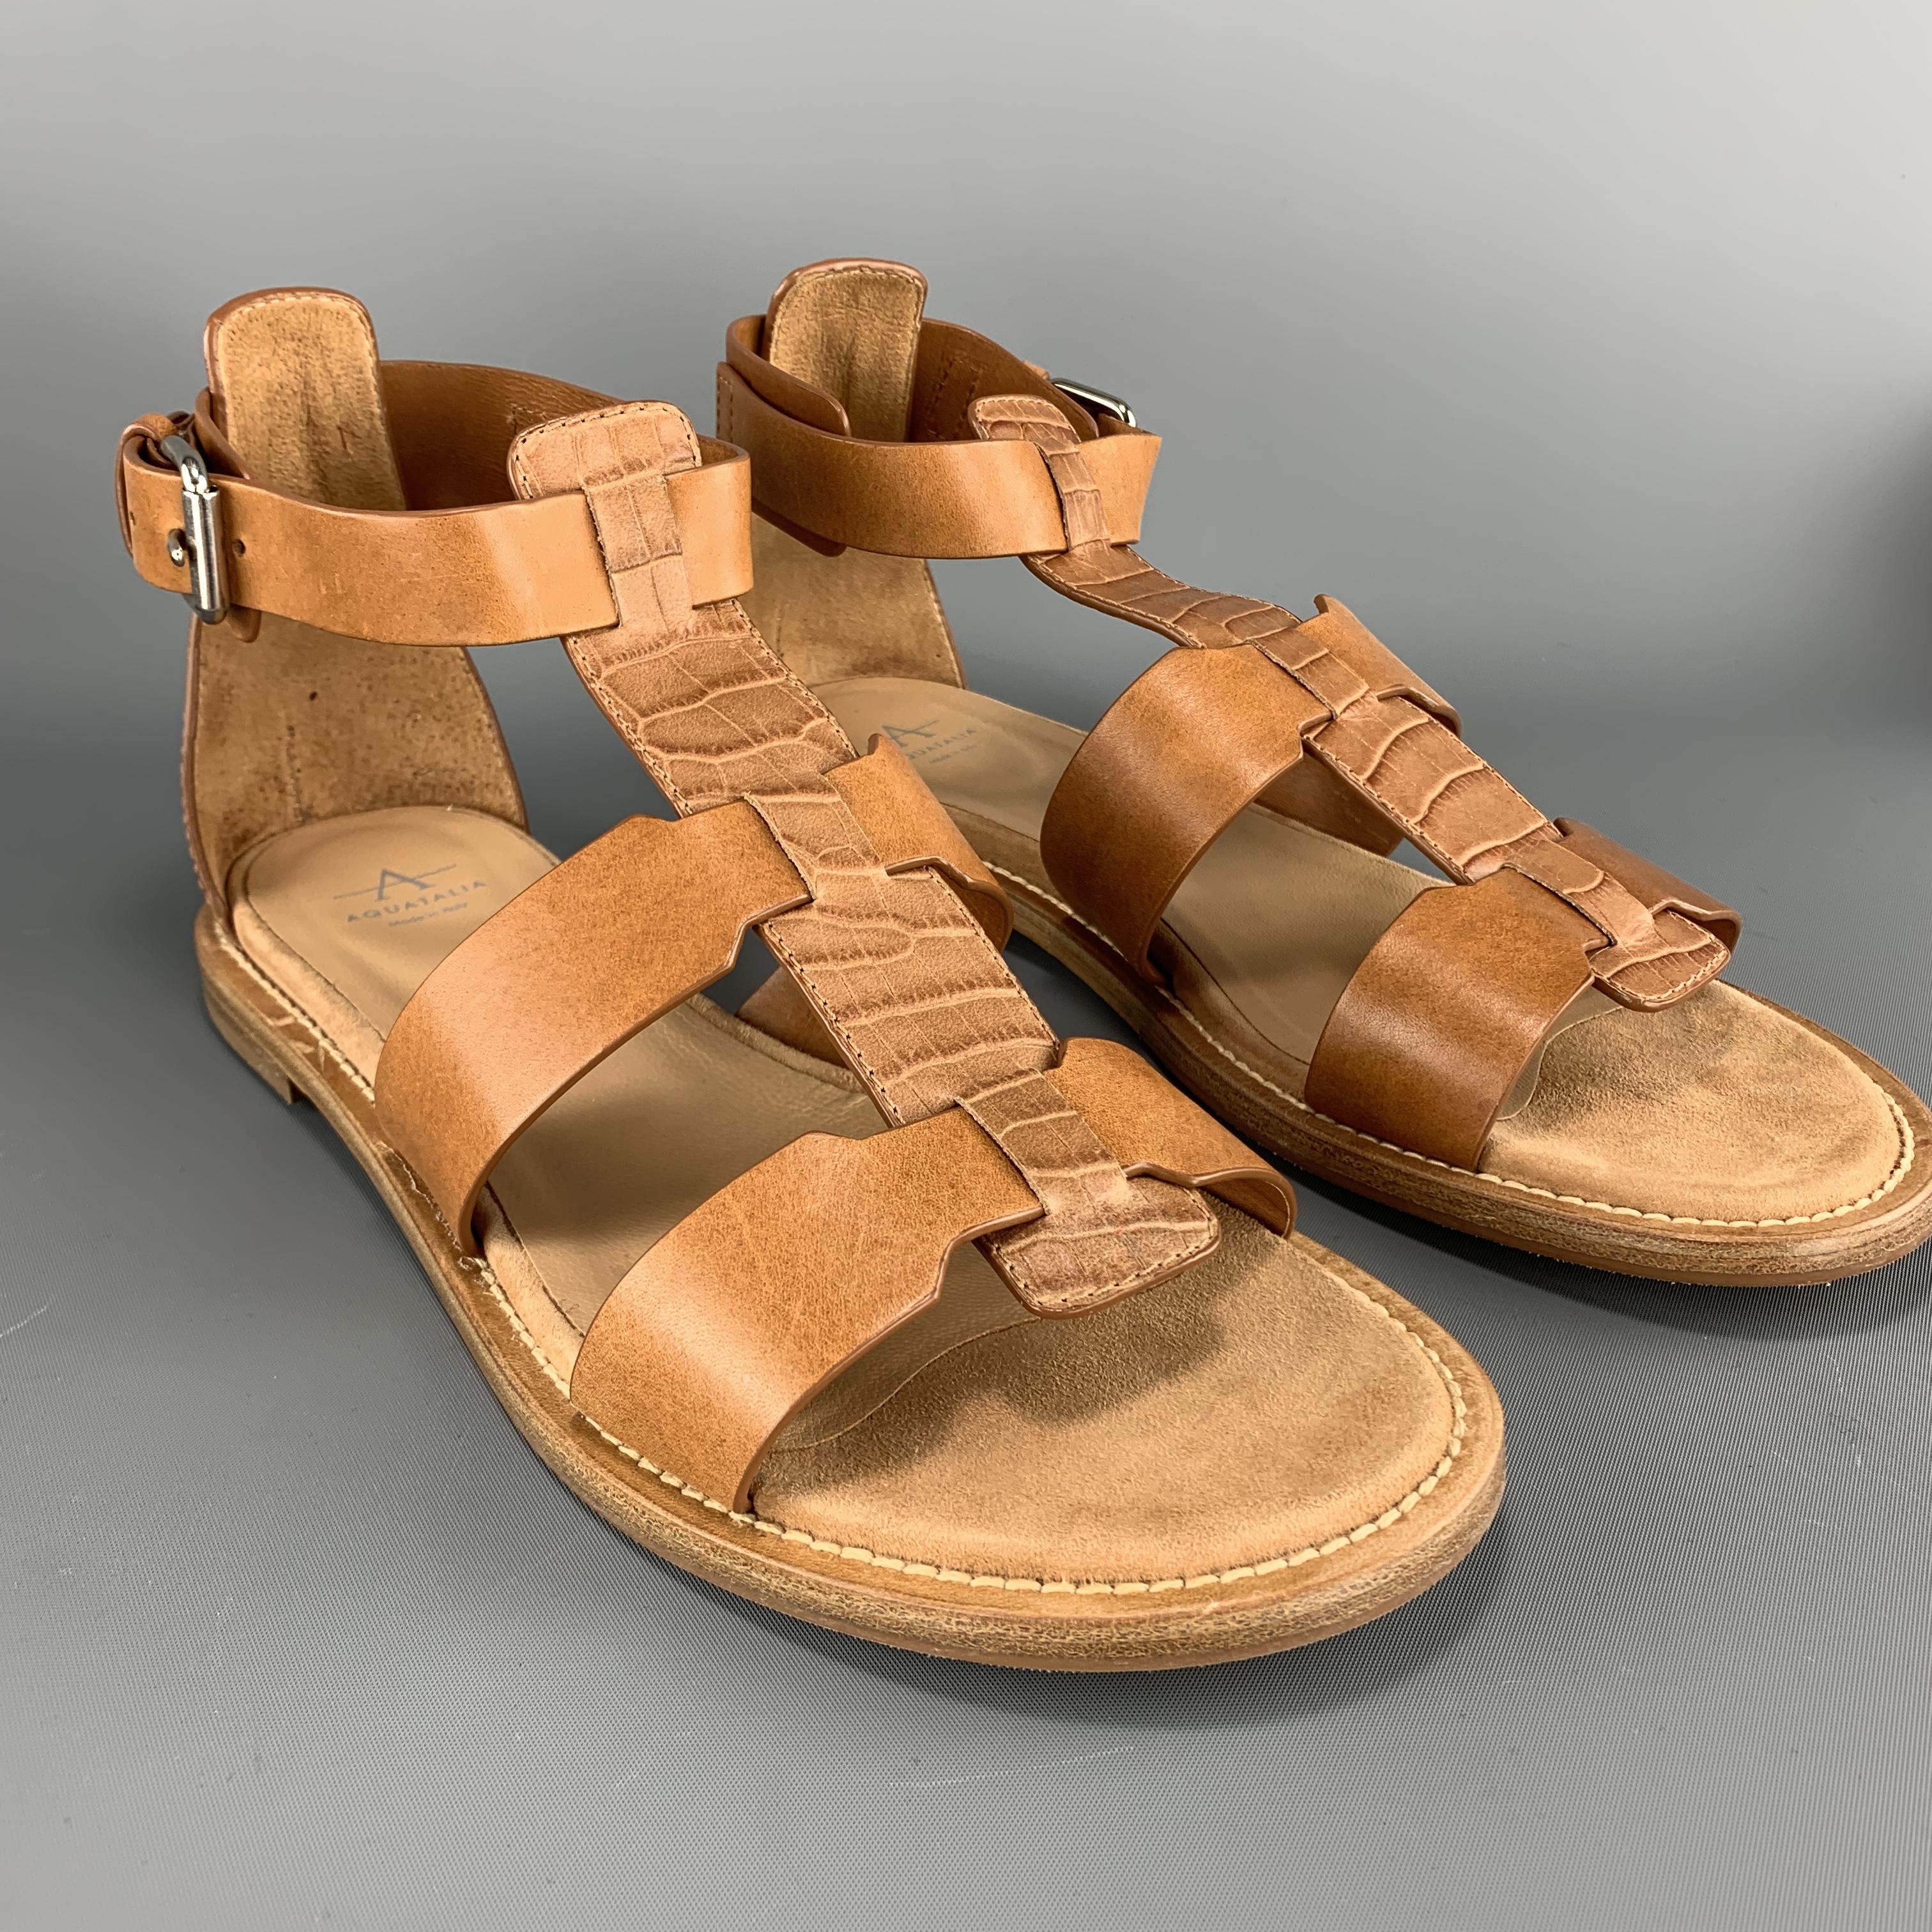 AQUATALIA gladiator sandals come in tan leather with smooth straps, and crocodile embossed T strap, and silver tone buckle. Made in Italy.

New with Box.
Marked: 9

Outsole: 10.75 x 4 in.